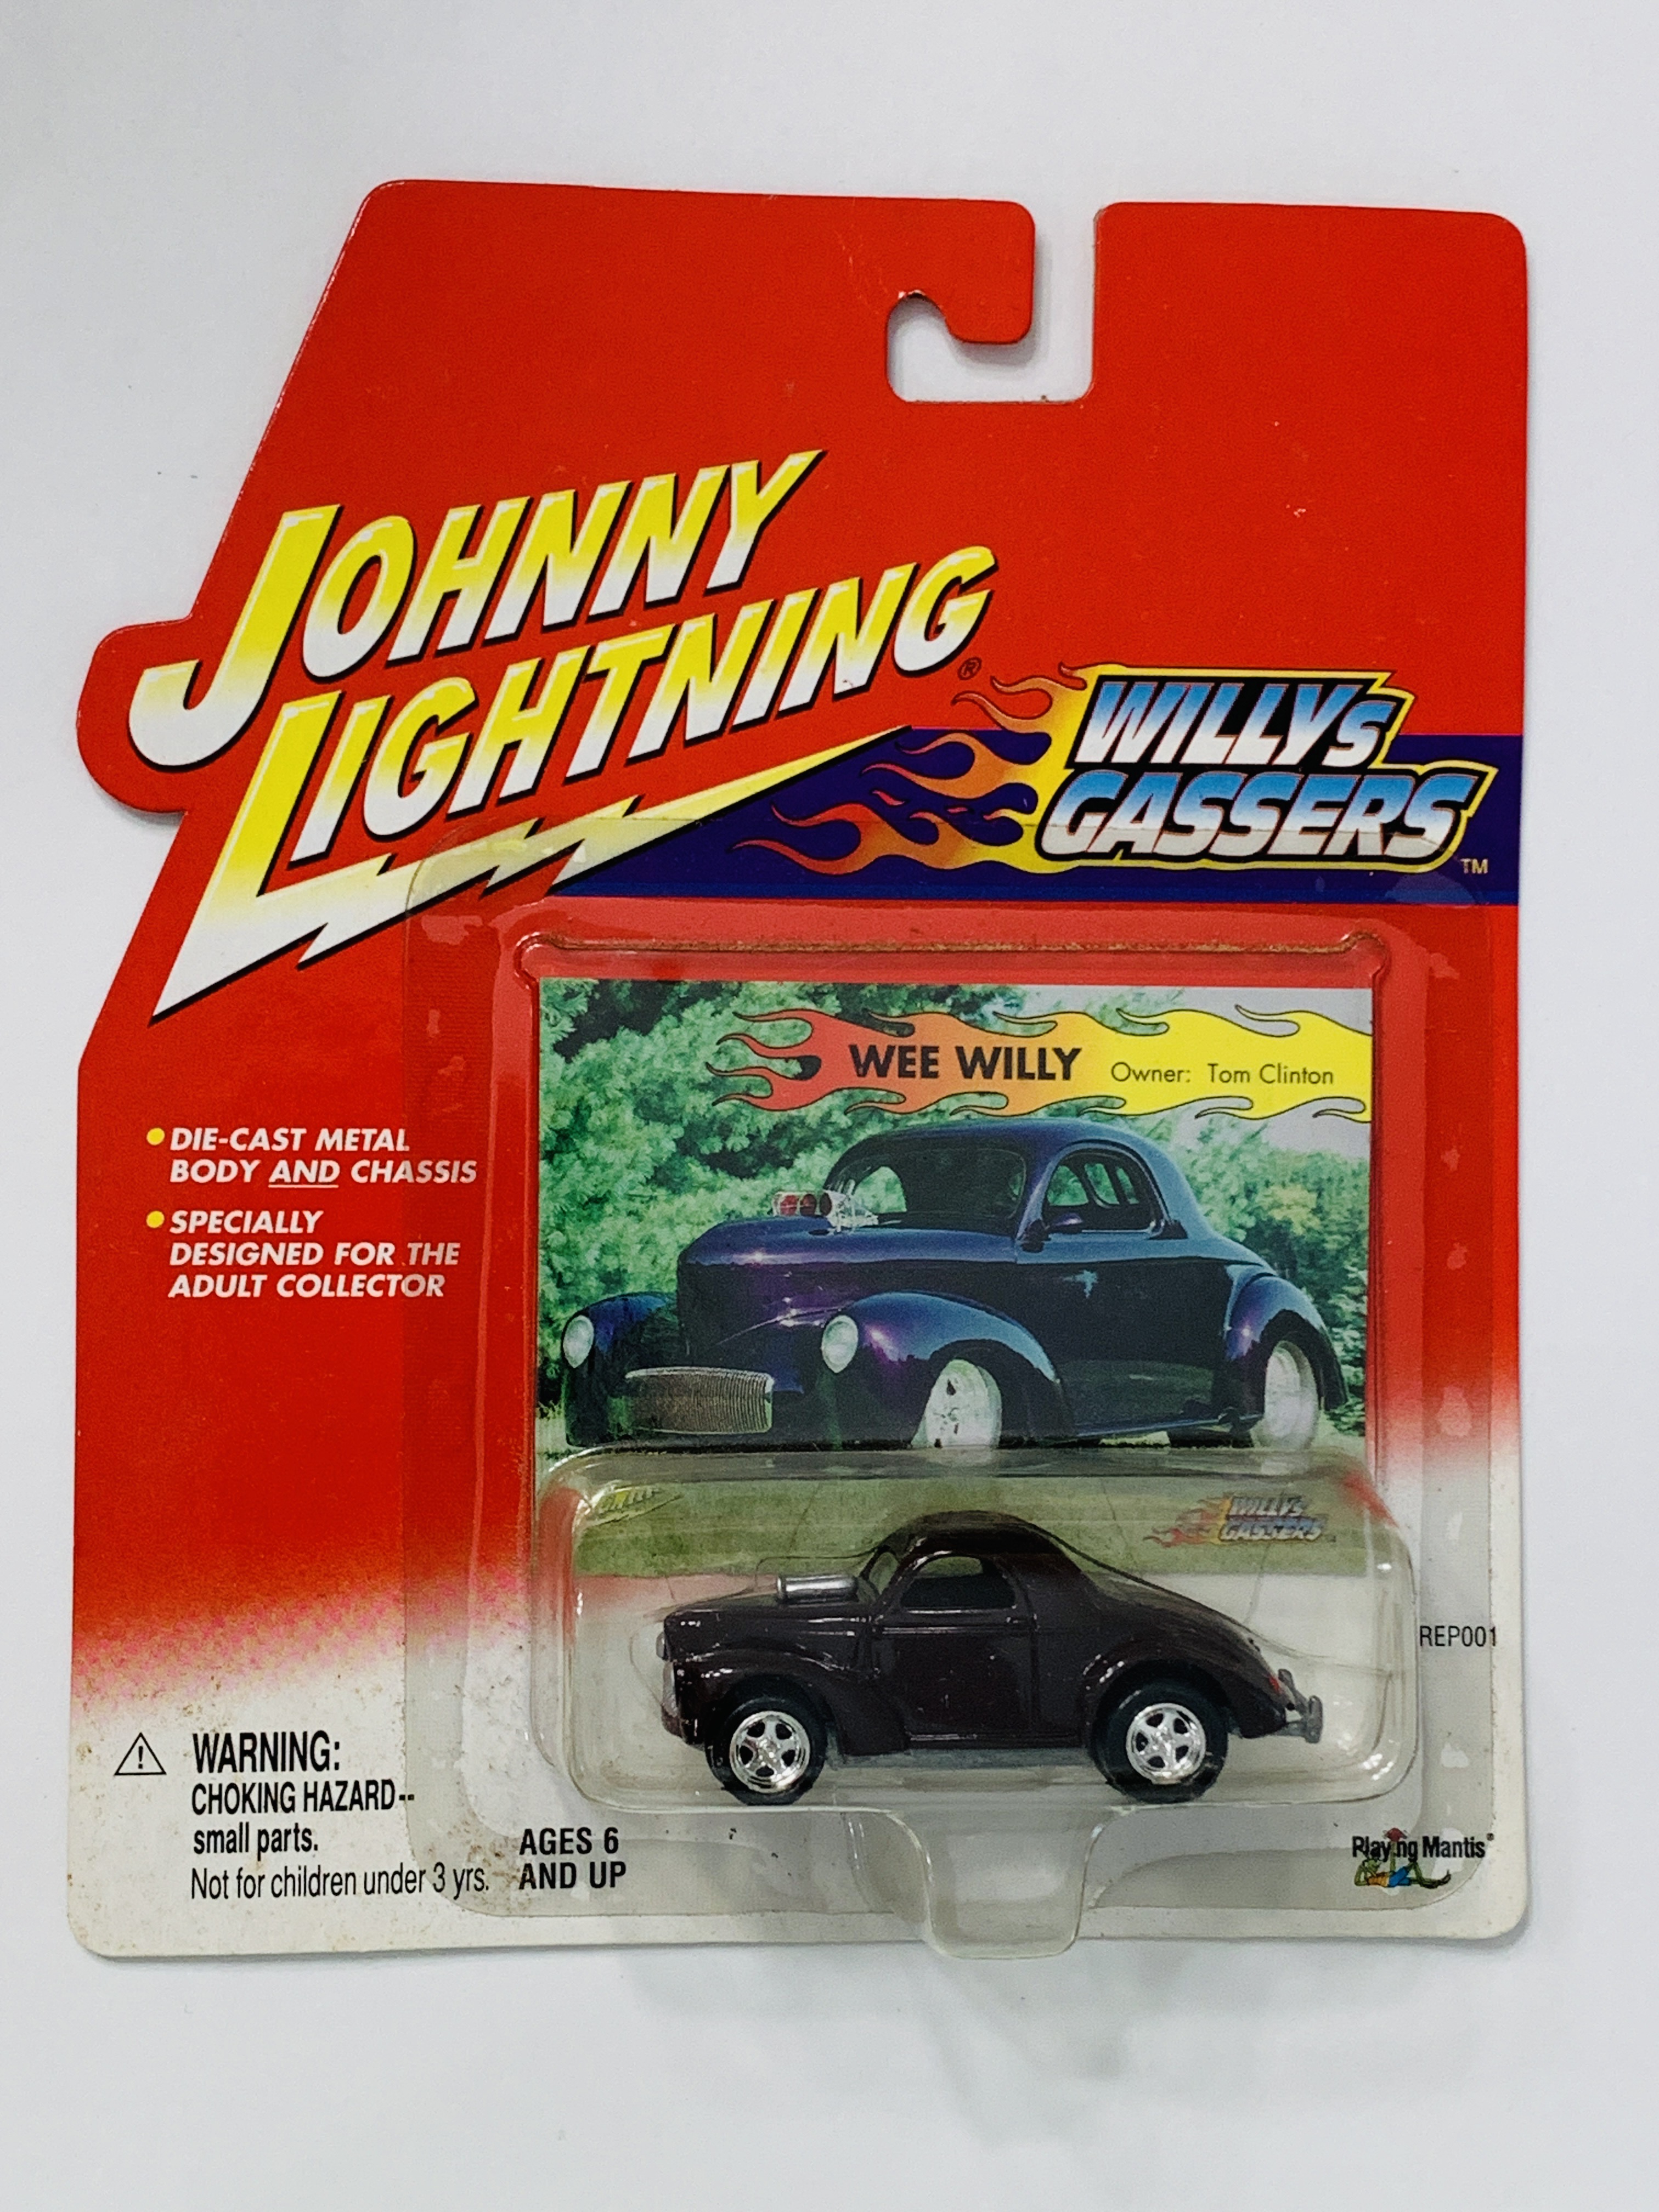 Johnny Lightning Willys Gassers Wee Willy